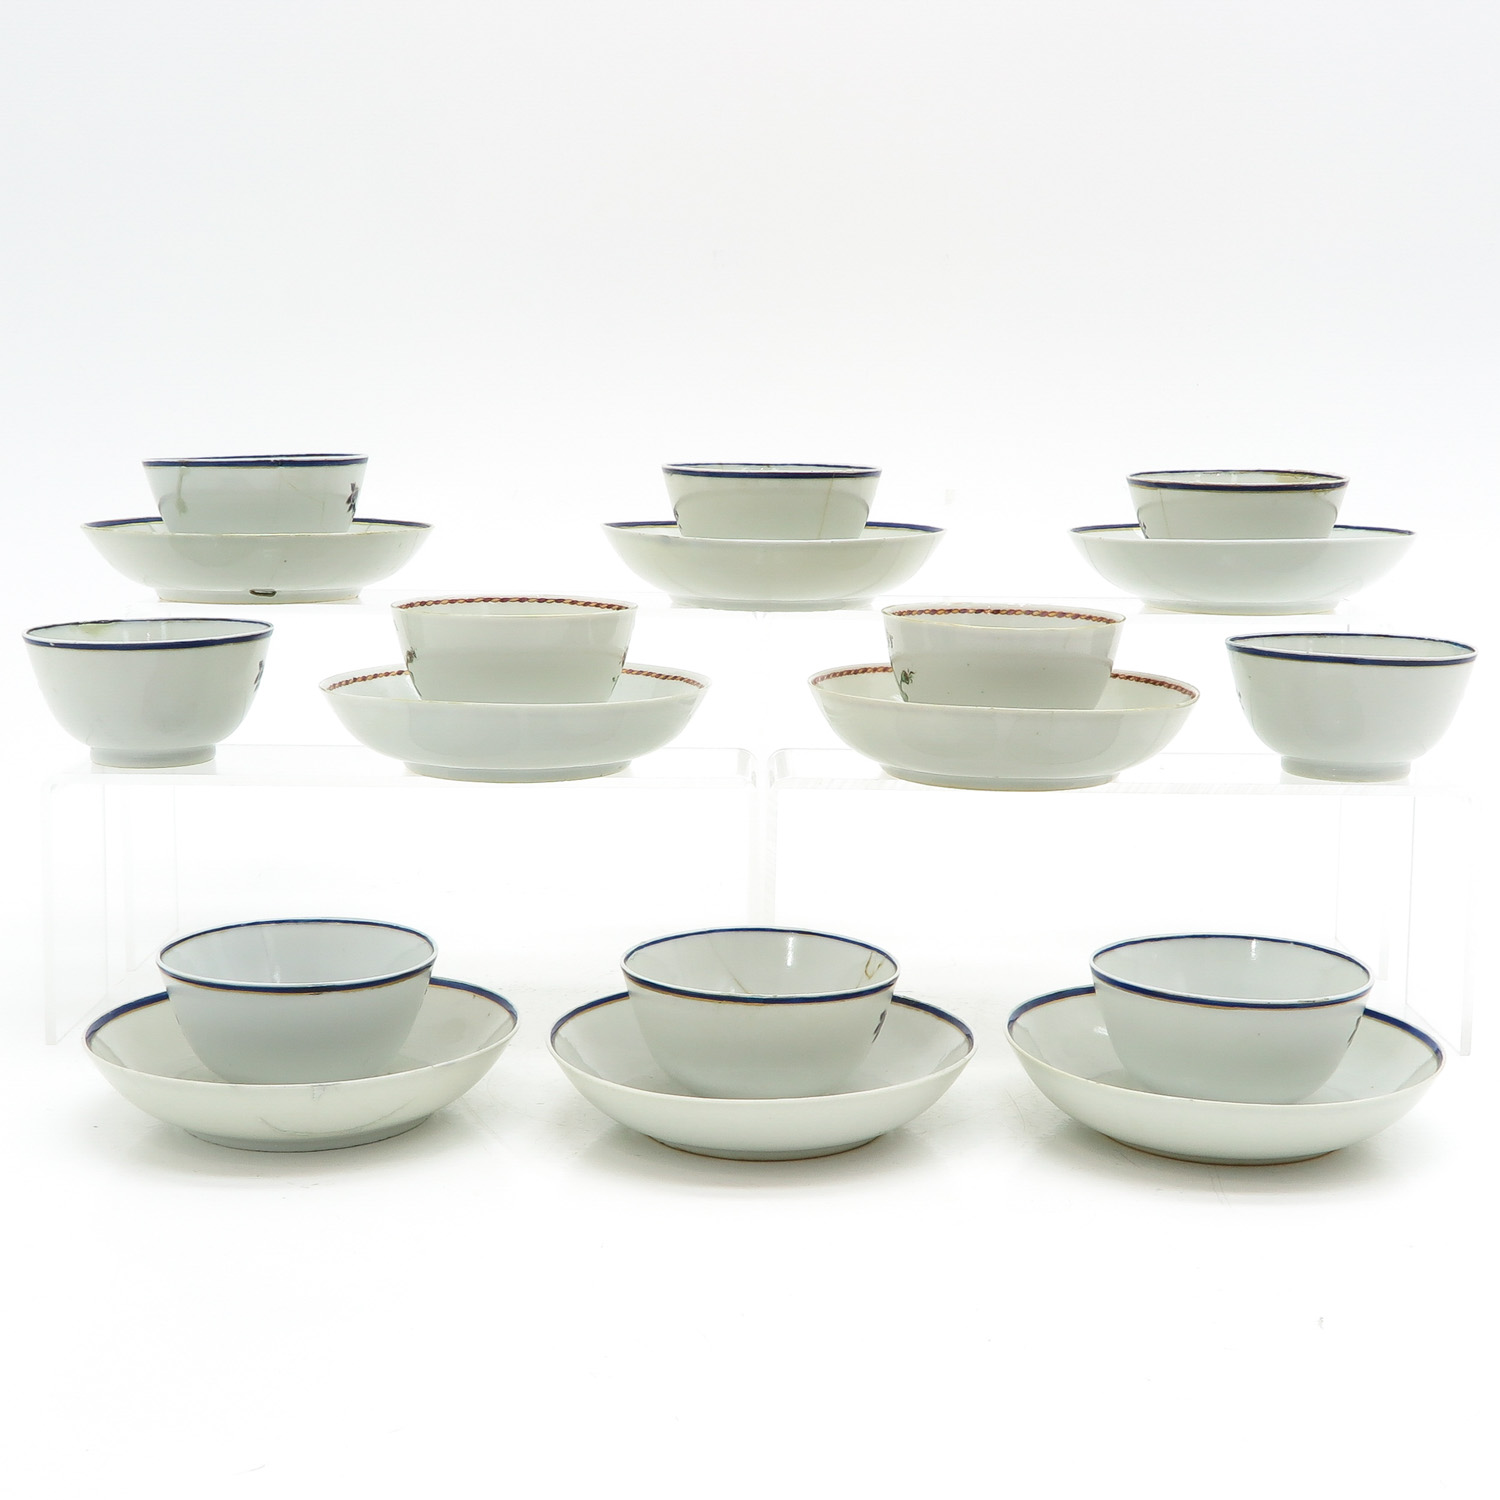 A Collection of Cups and Saucers - Image 4 of 8